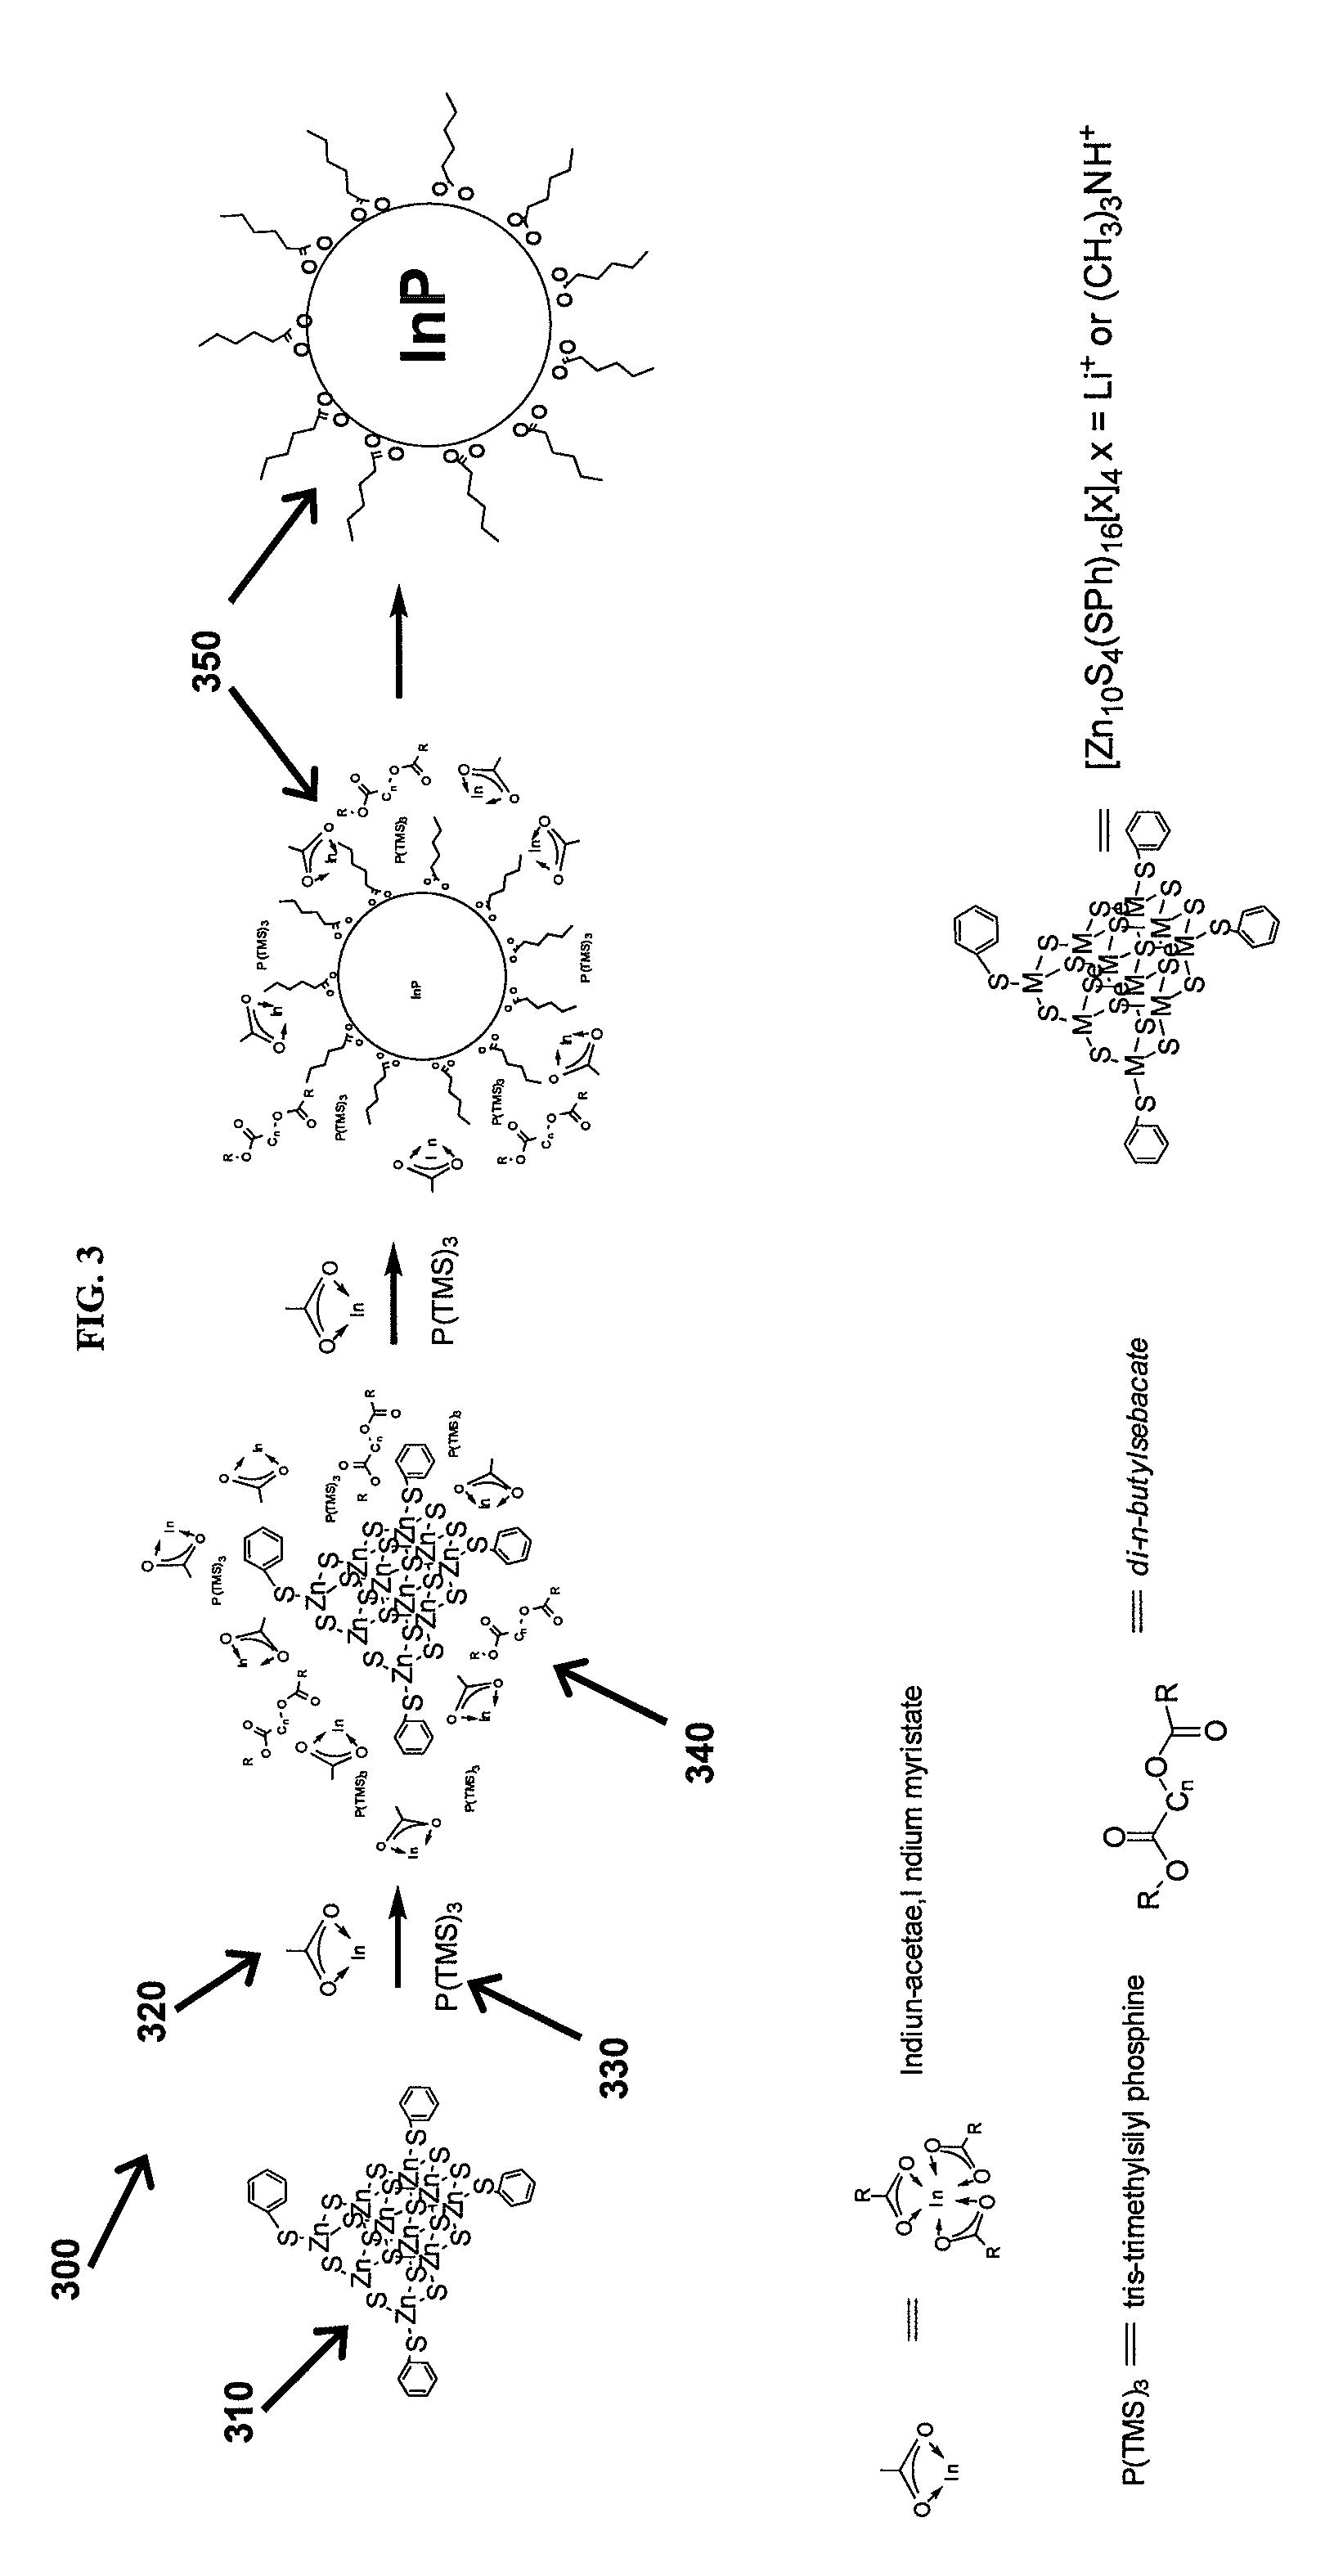 Preparation of nanoparticle materials